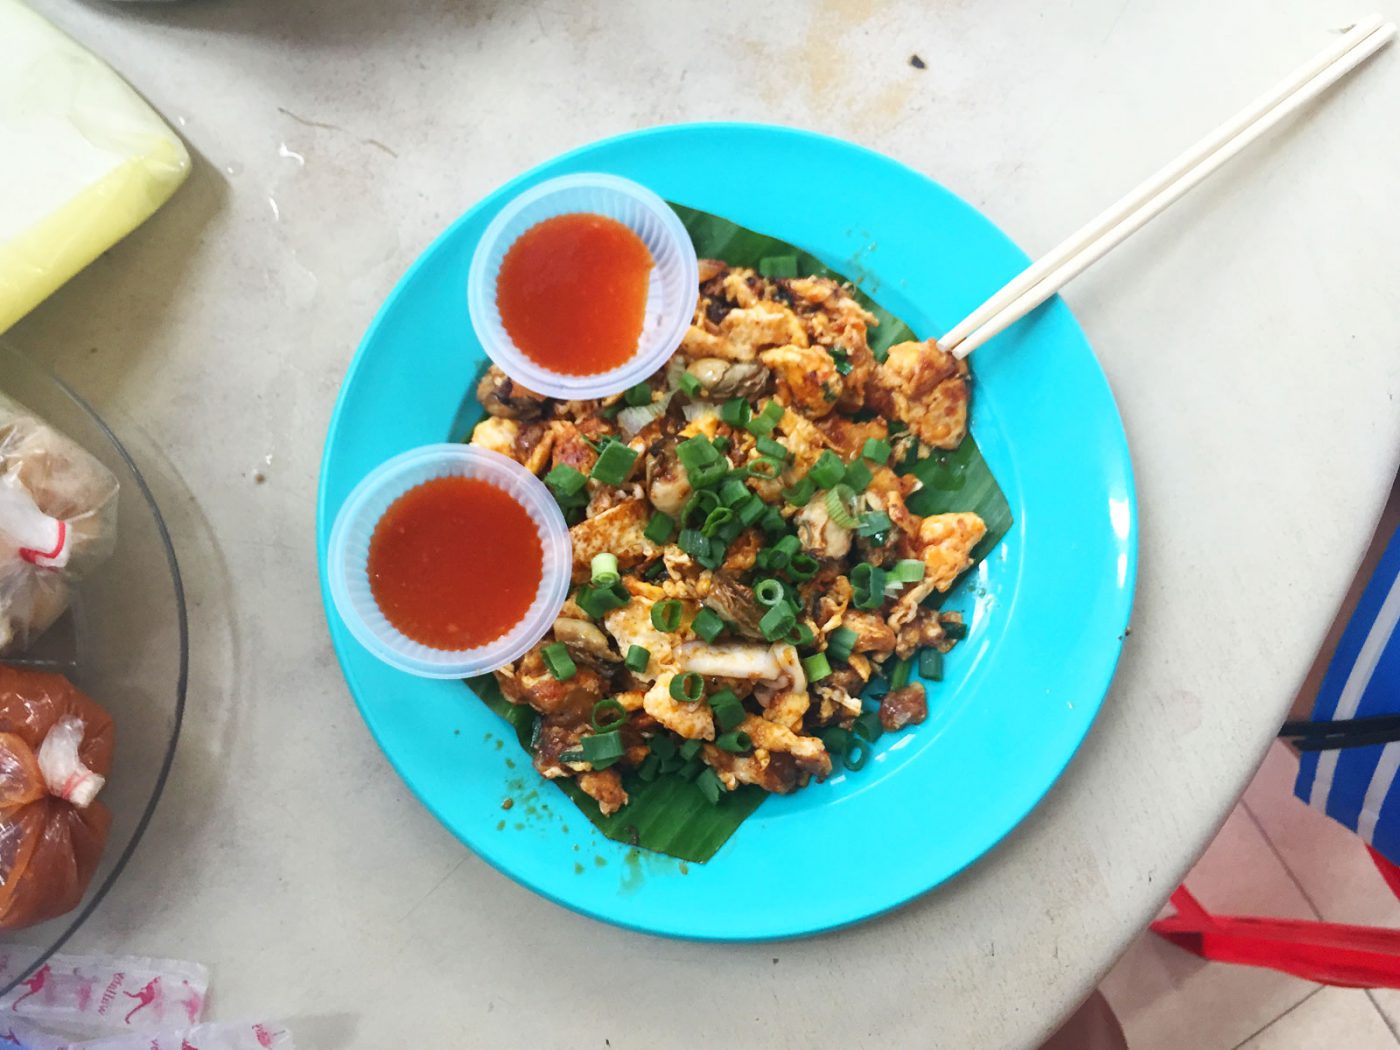 Oyster Omelette at Lorong Selamat